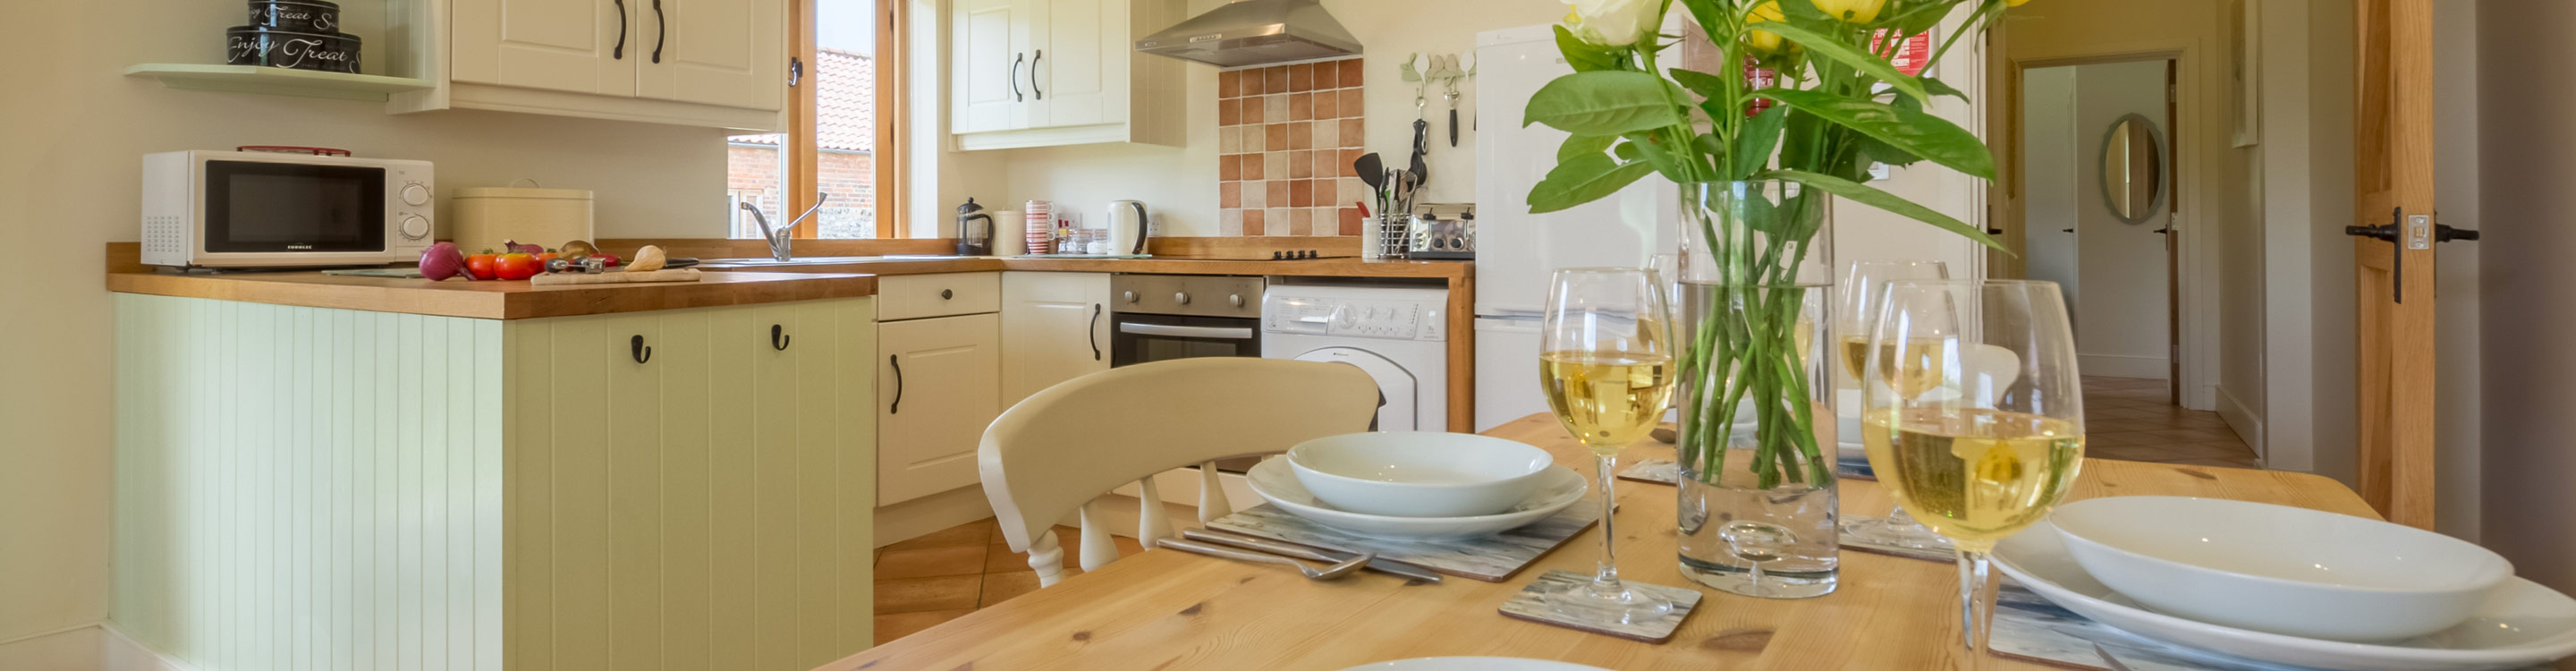 Self-Catering Accommodation in Norfolk